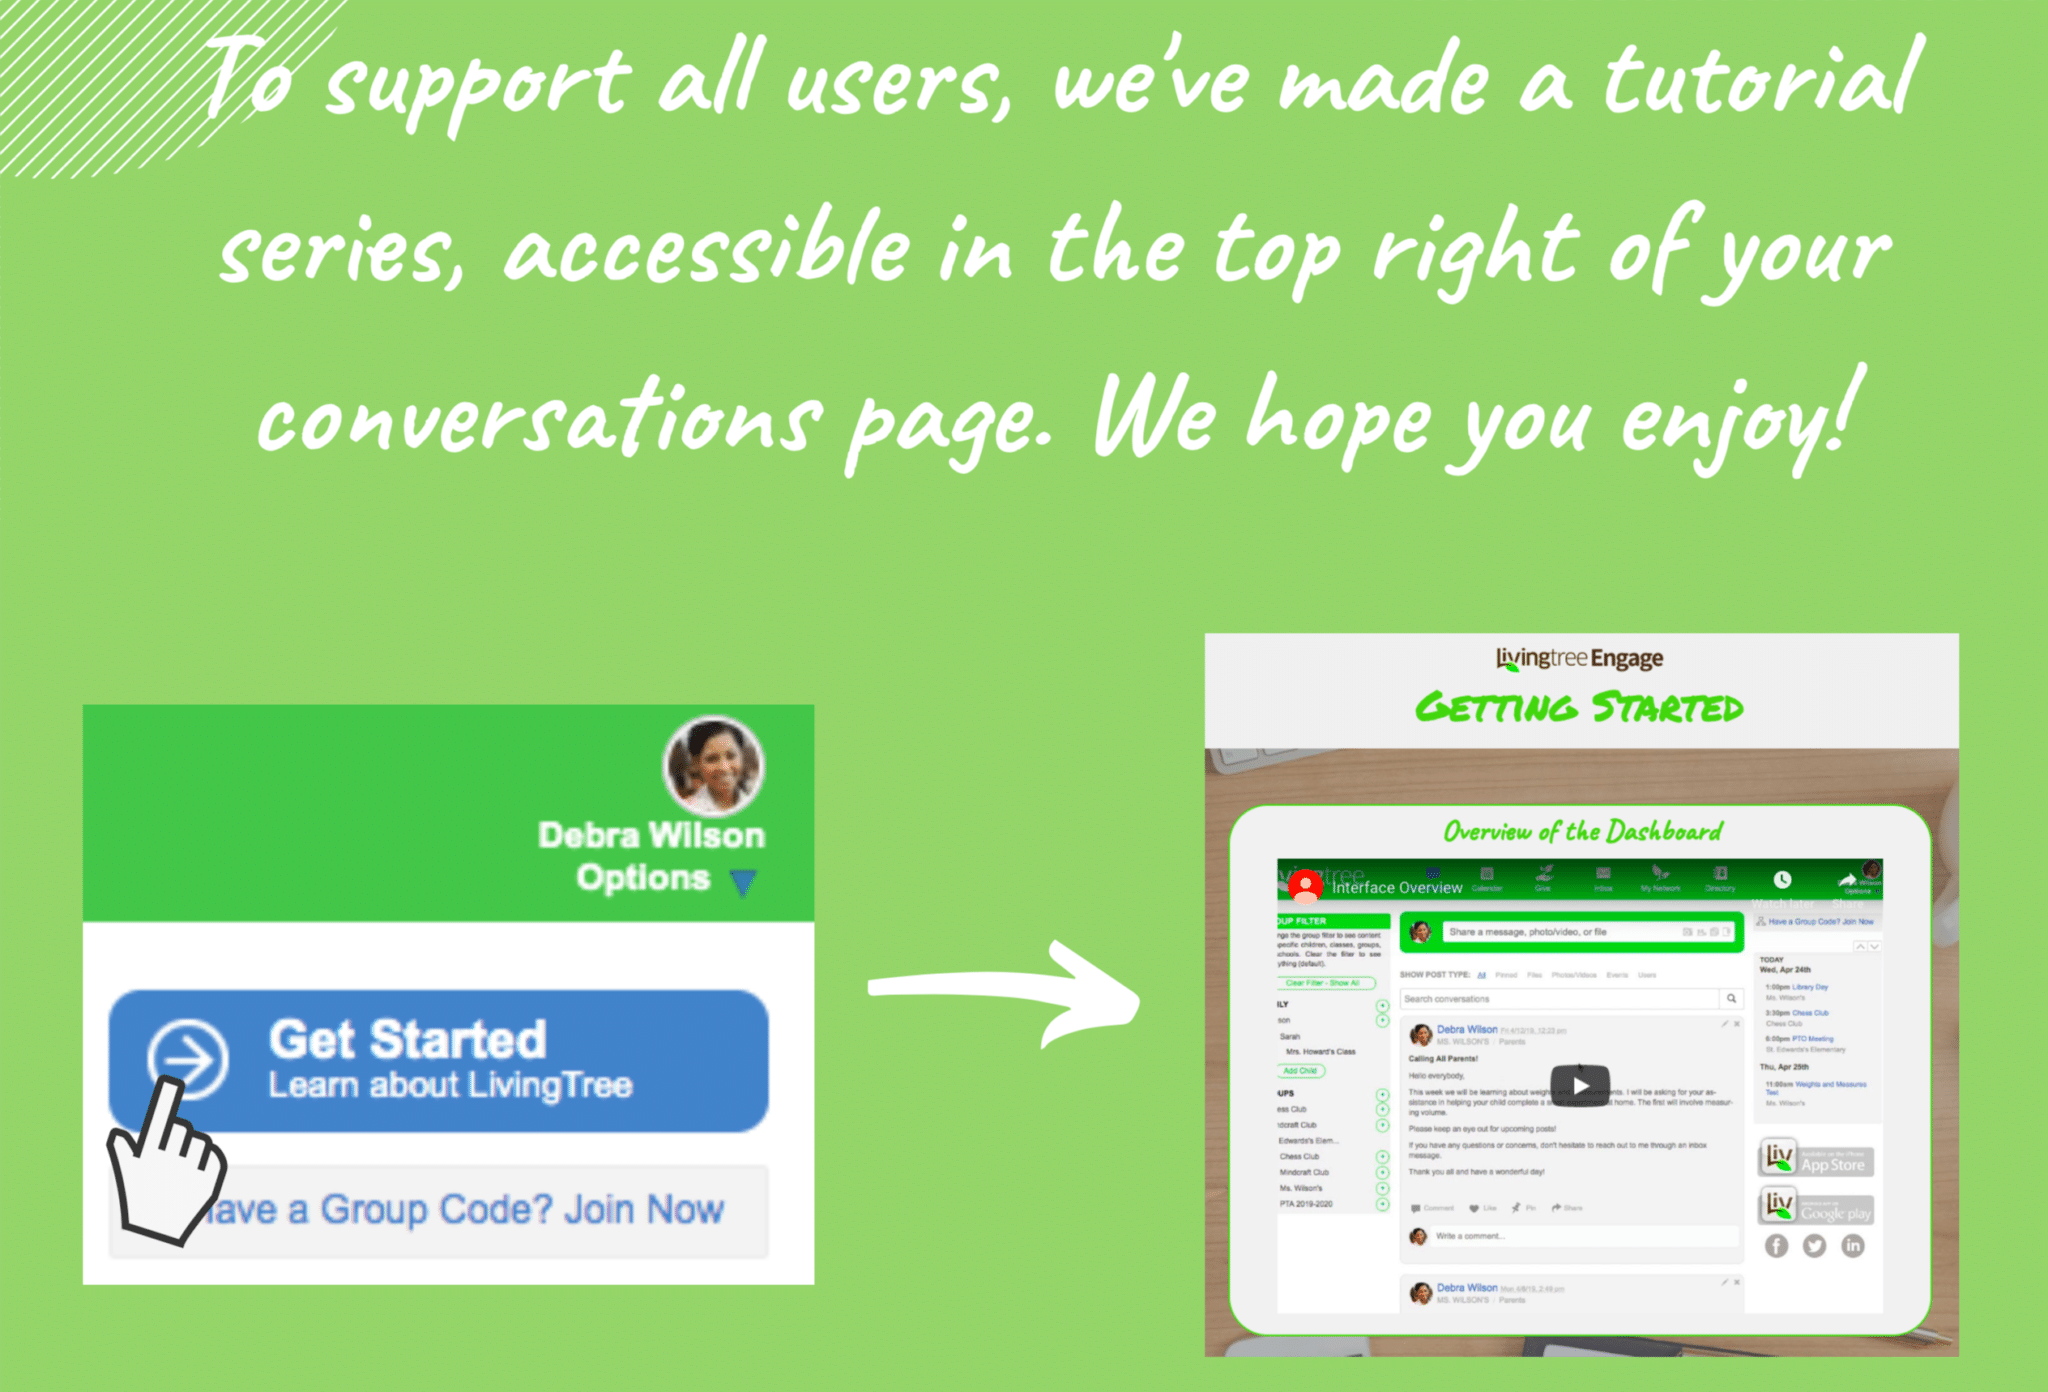 To support all users, we've made a tutorial series, accessible in the top right of your conversations page.